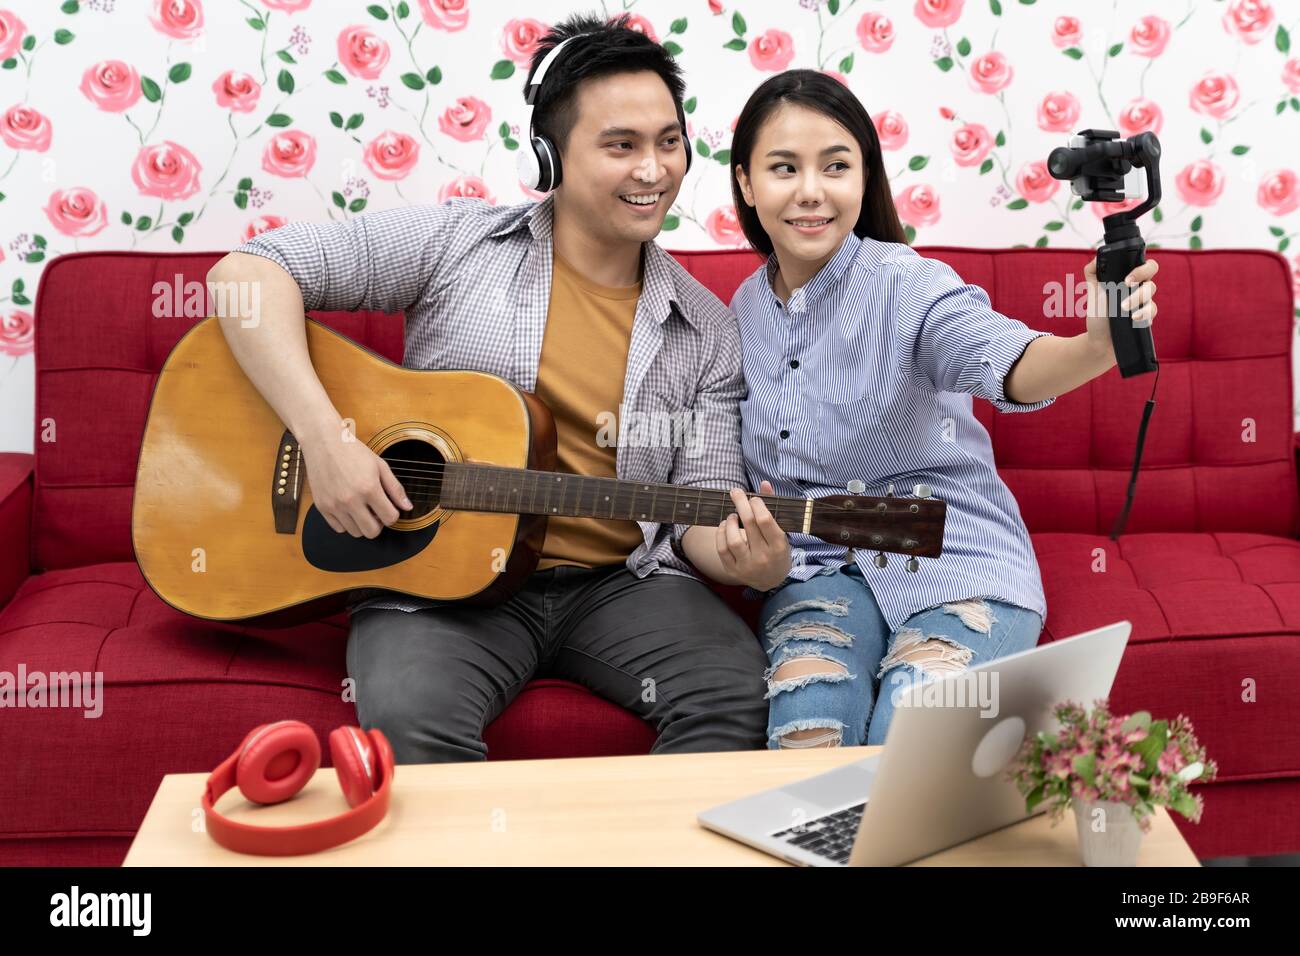 Duo singer do vlog live singing song with guitar to share on social media. Using for vlog social media influencer concept. Stock Photo